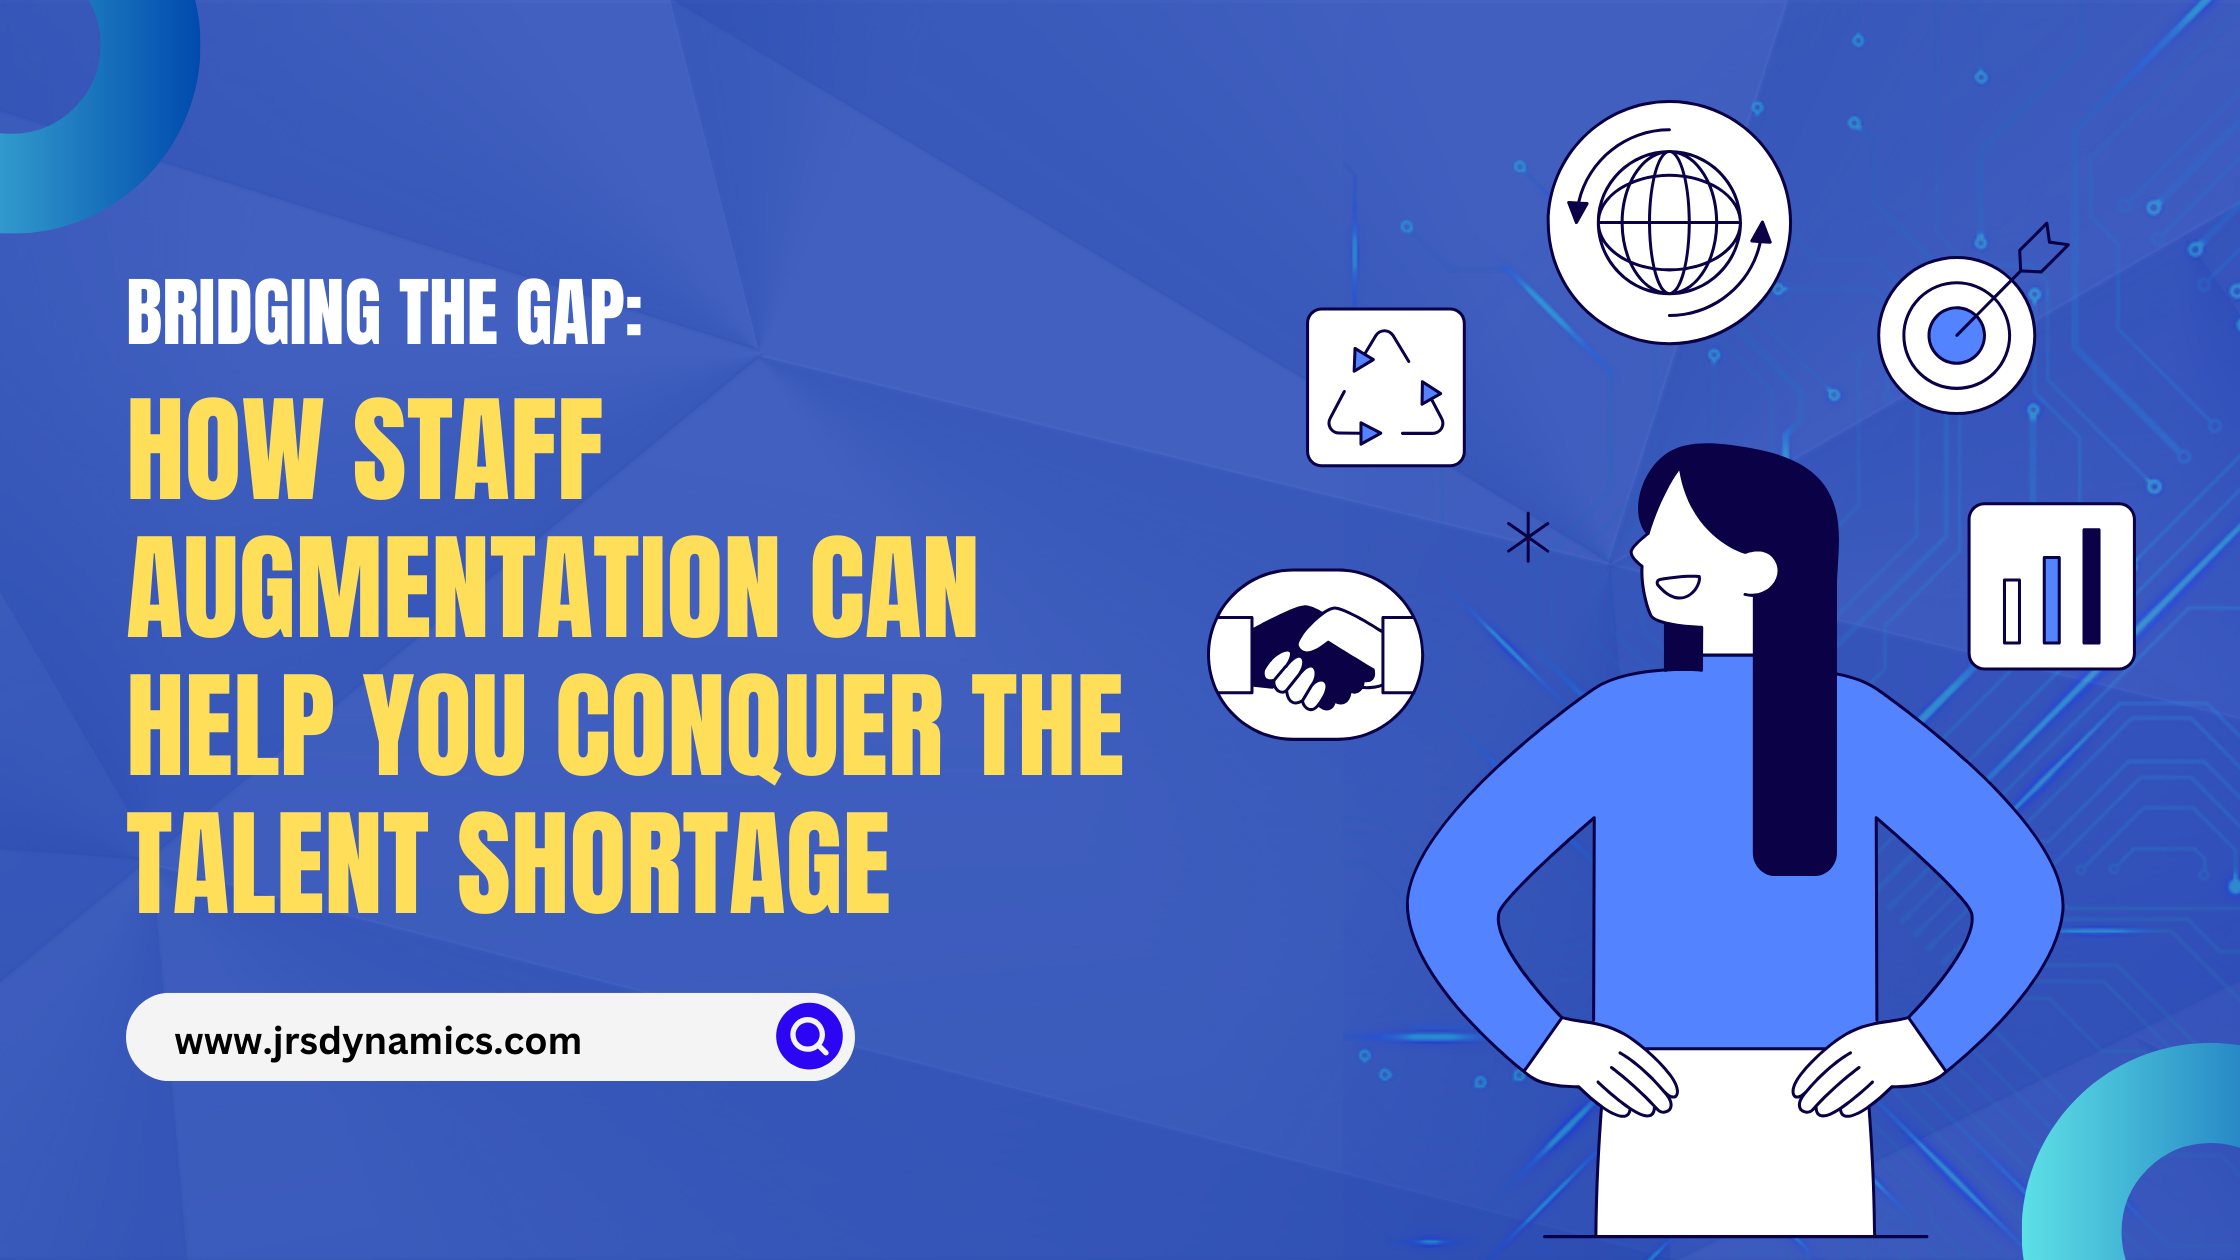 Bridging the Gap: How Staff Augmentation Can Help You Conquer the Talent Shortage